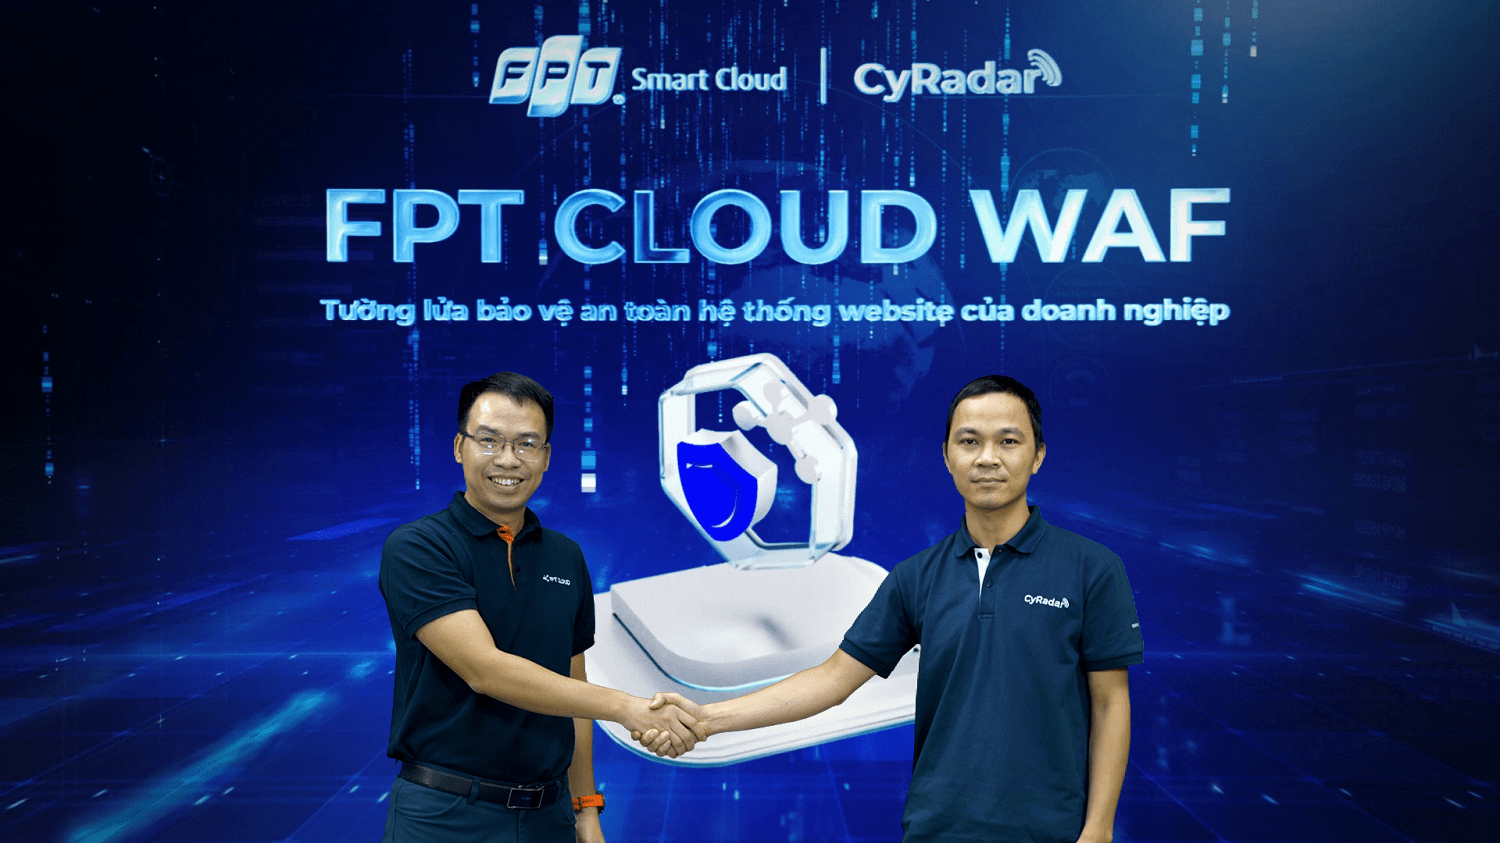 FPT Smart Cloud and CyRadar to launch a new firewall solution for businesses